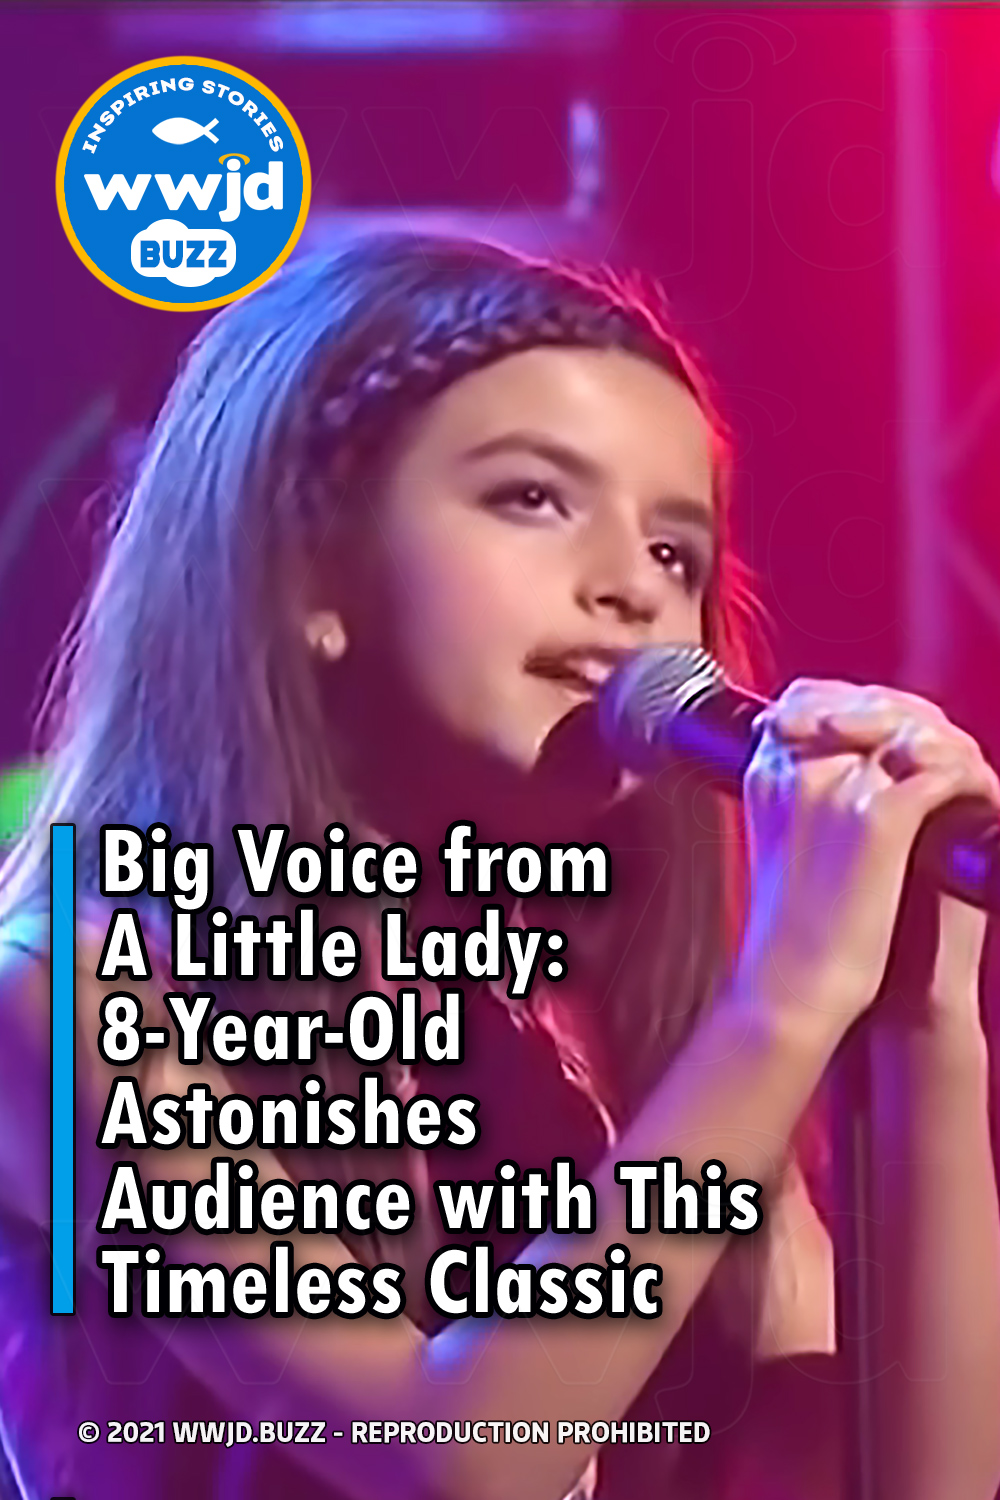 Big Voice from A Little Lady: 8-Year-Old Astonishes Audience with This Timeless Classic